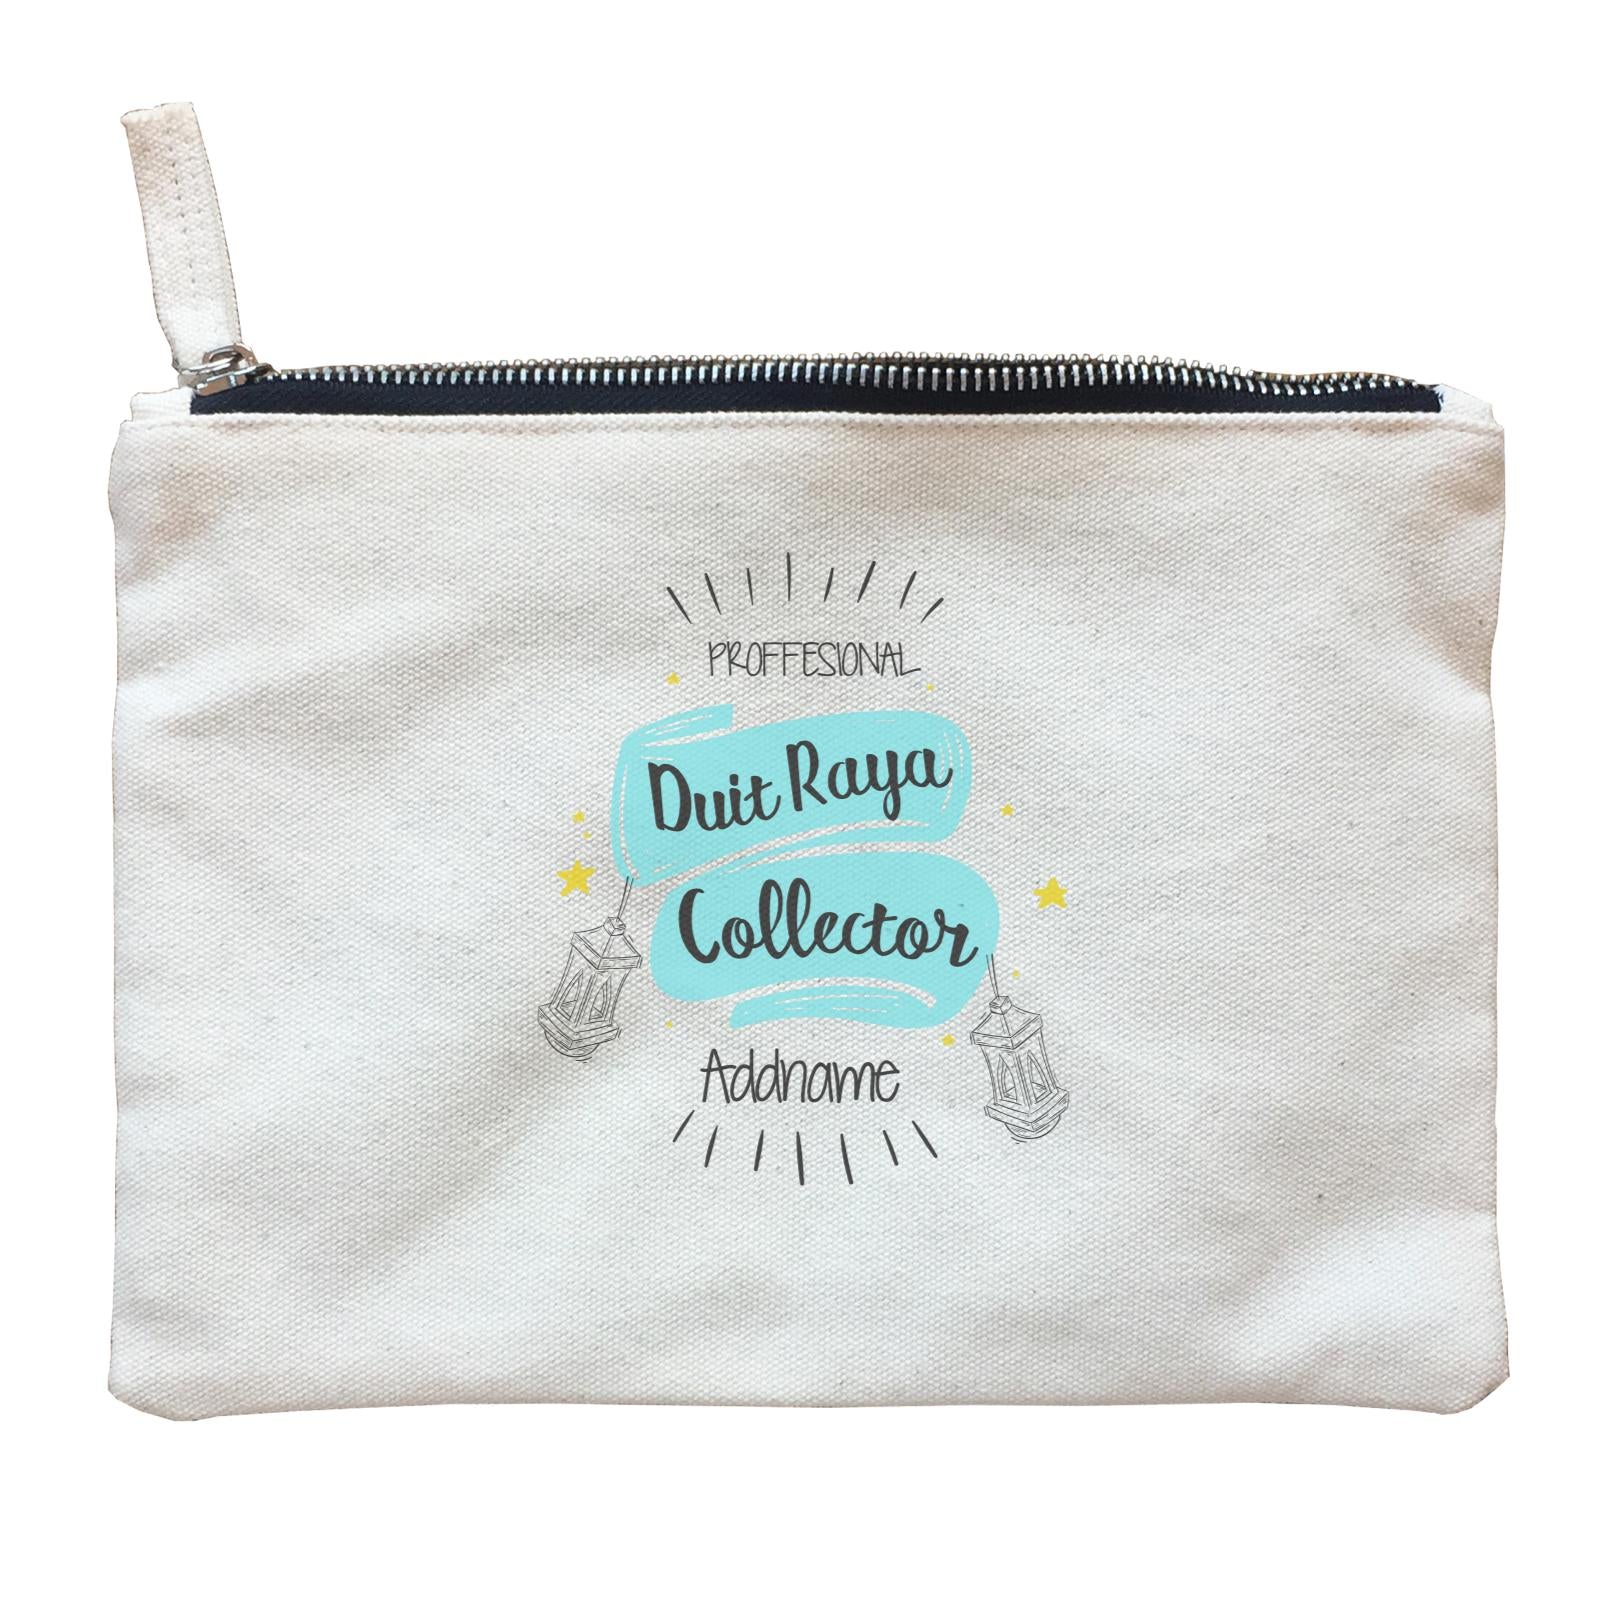 Raya Banner Professional Duit Raya Collector Addname Zipper Pouch